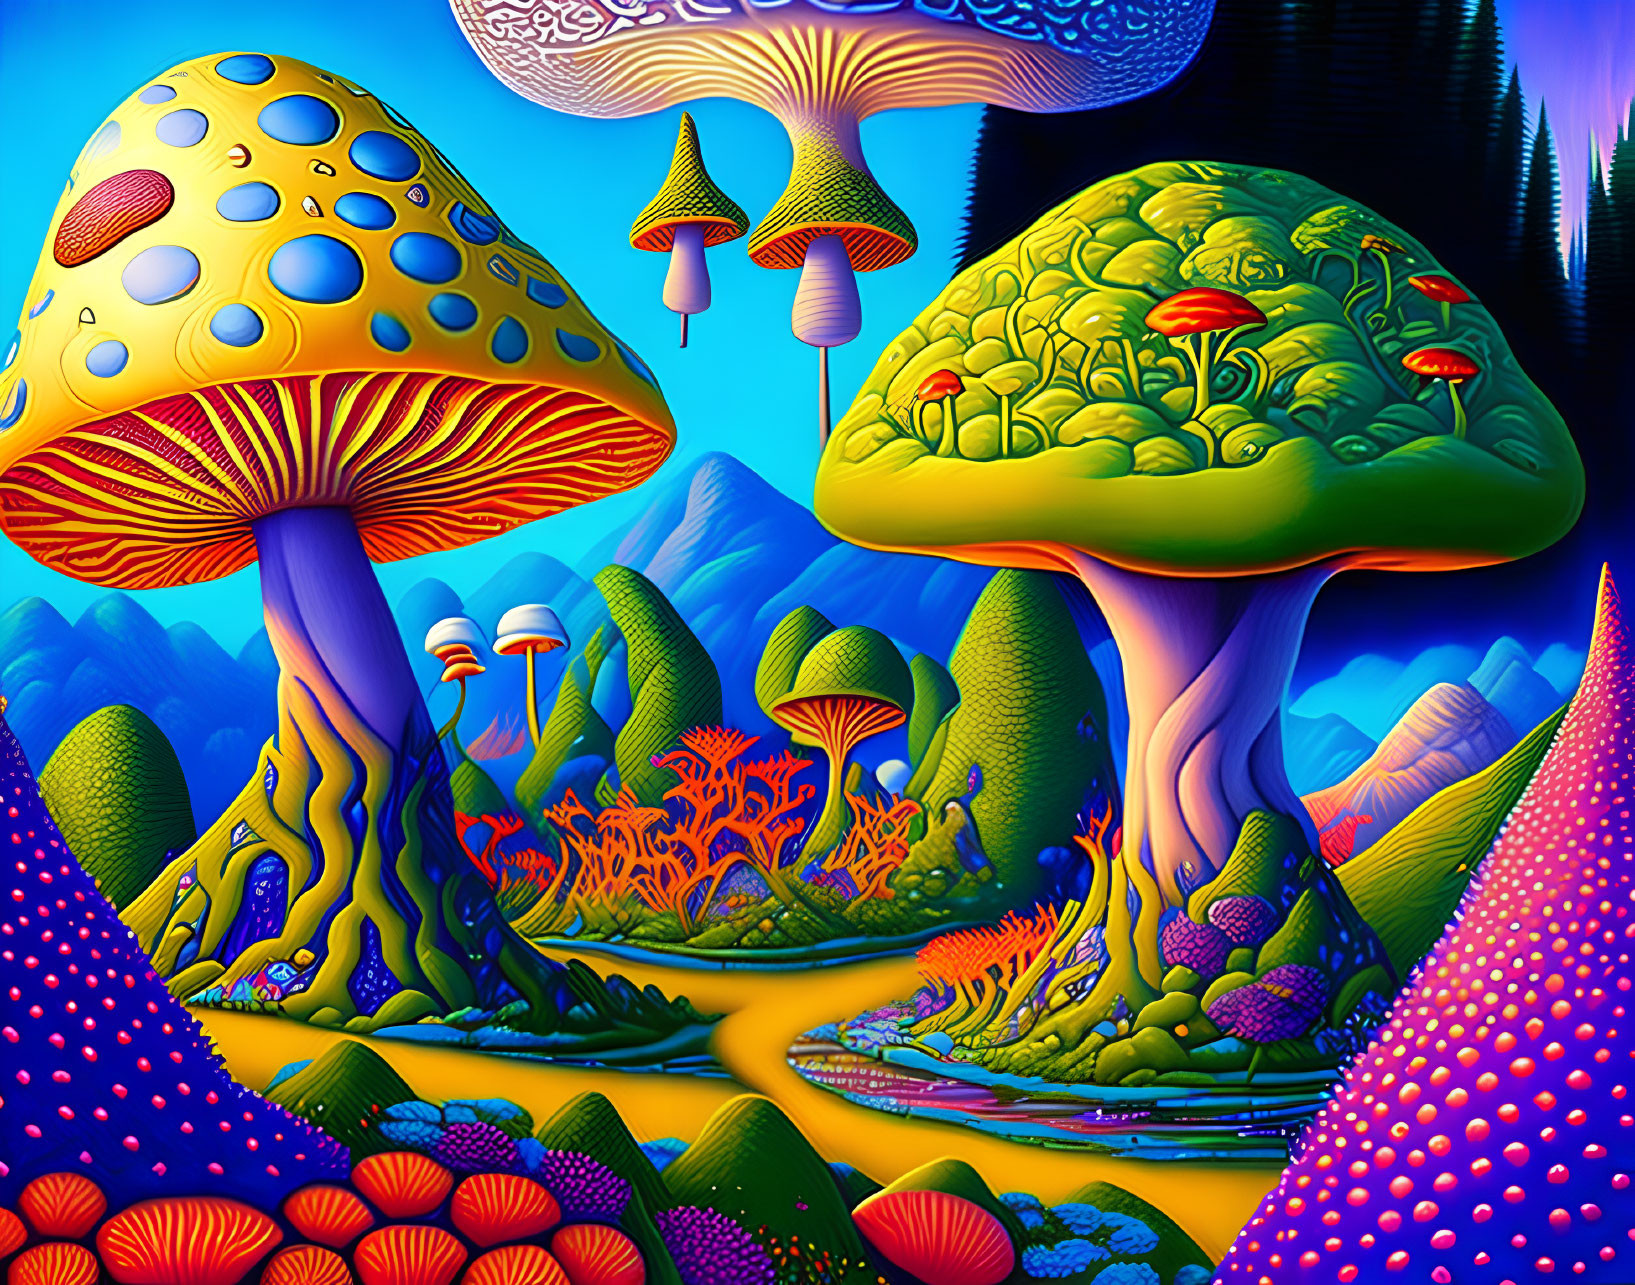 Colorful Psychedelic Landscape with Oversized Mushrooms and Surreal Sky